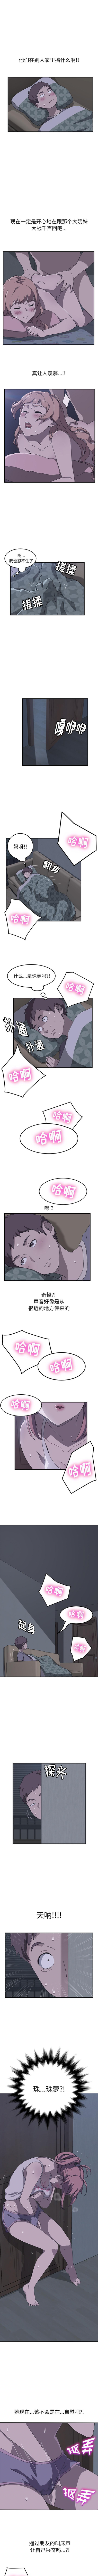 Bed 我的野蠻室友 1-20 Lips - Page 11